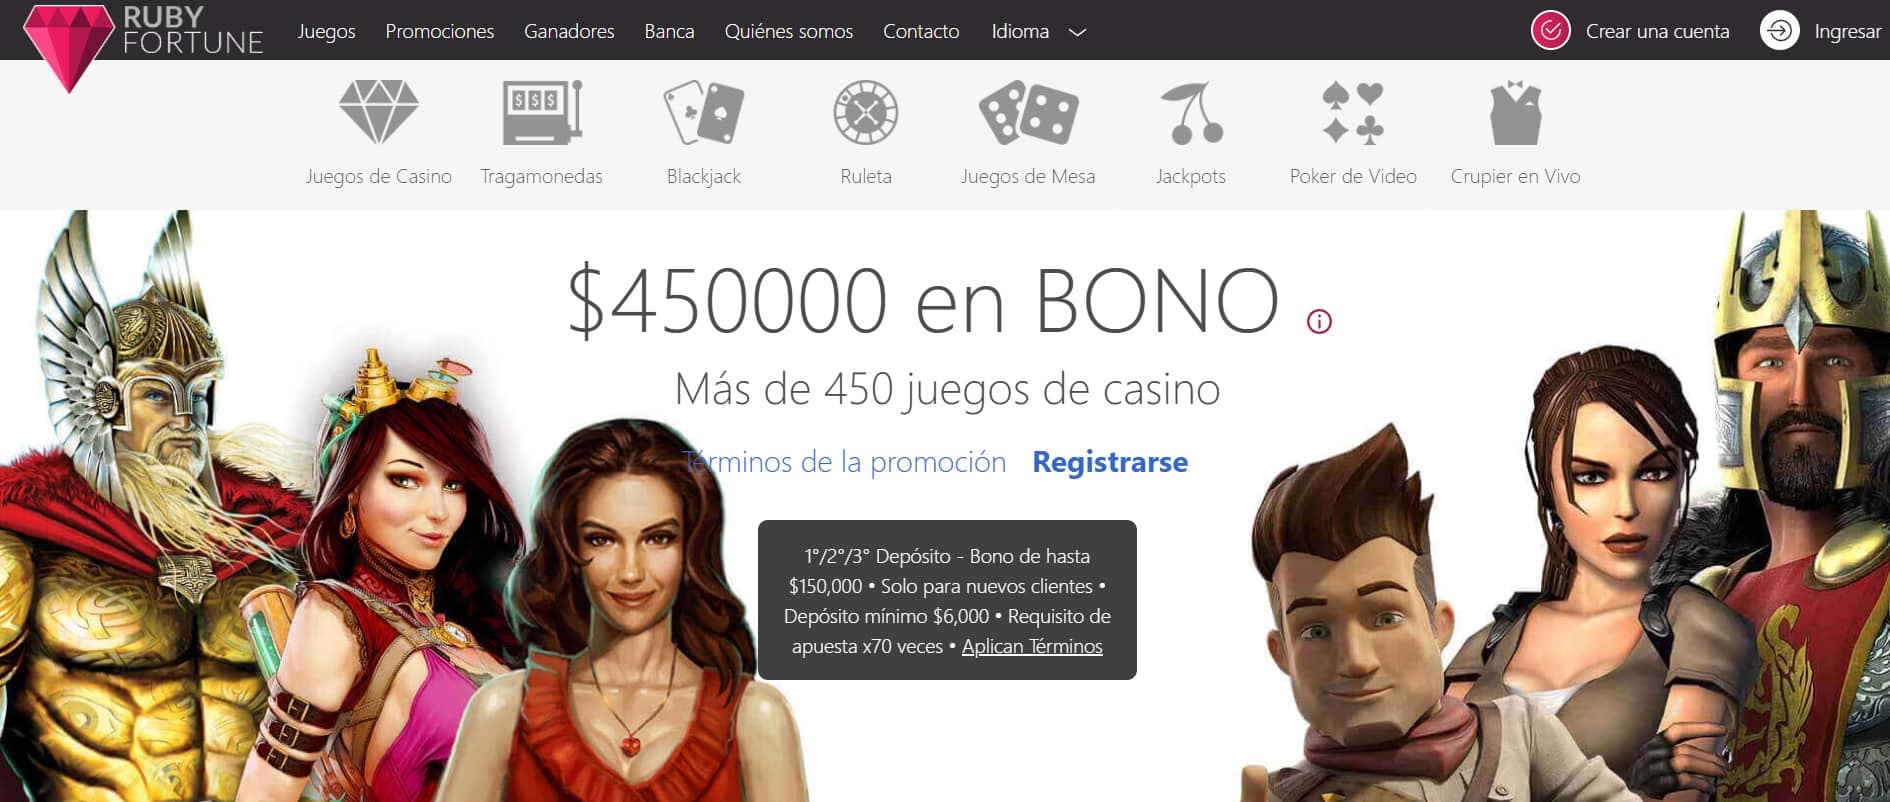 casinos online chile ruby fortune